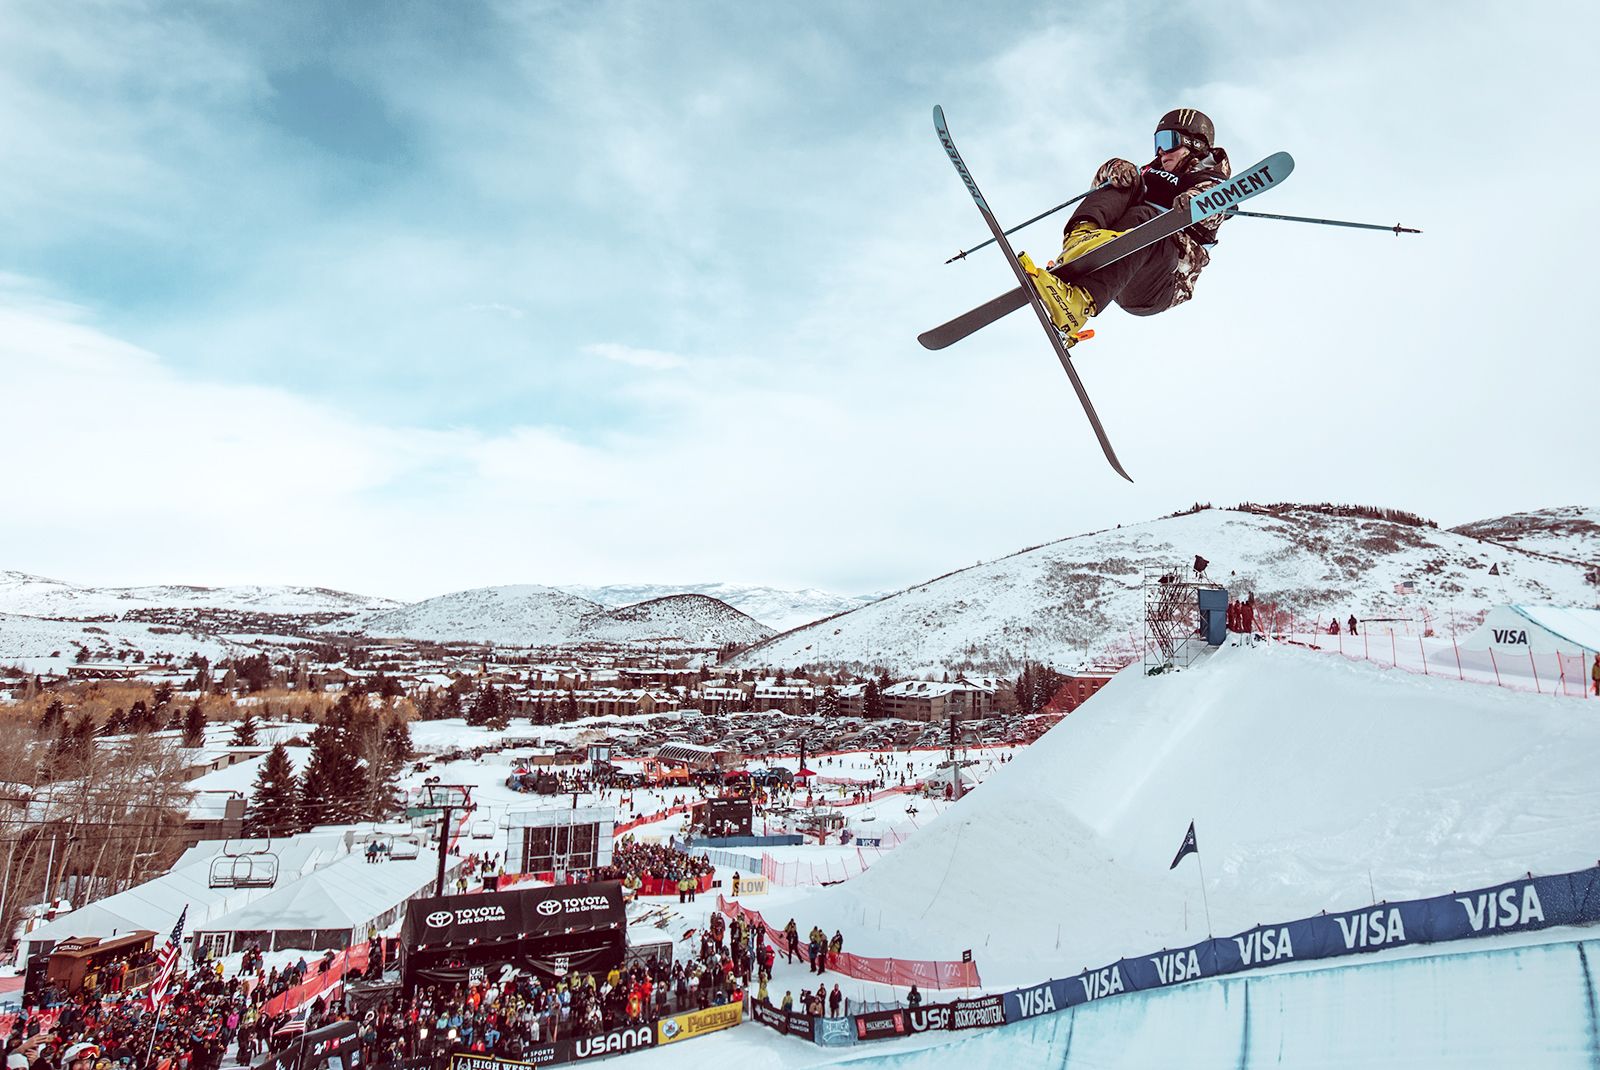 Freestyle Skiier Launching in the Air at the FIS World Cup in Park City Utah